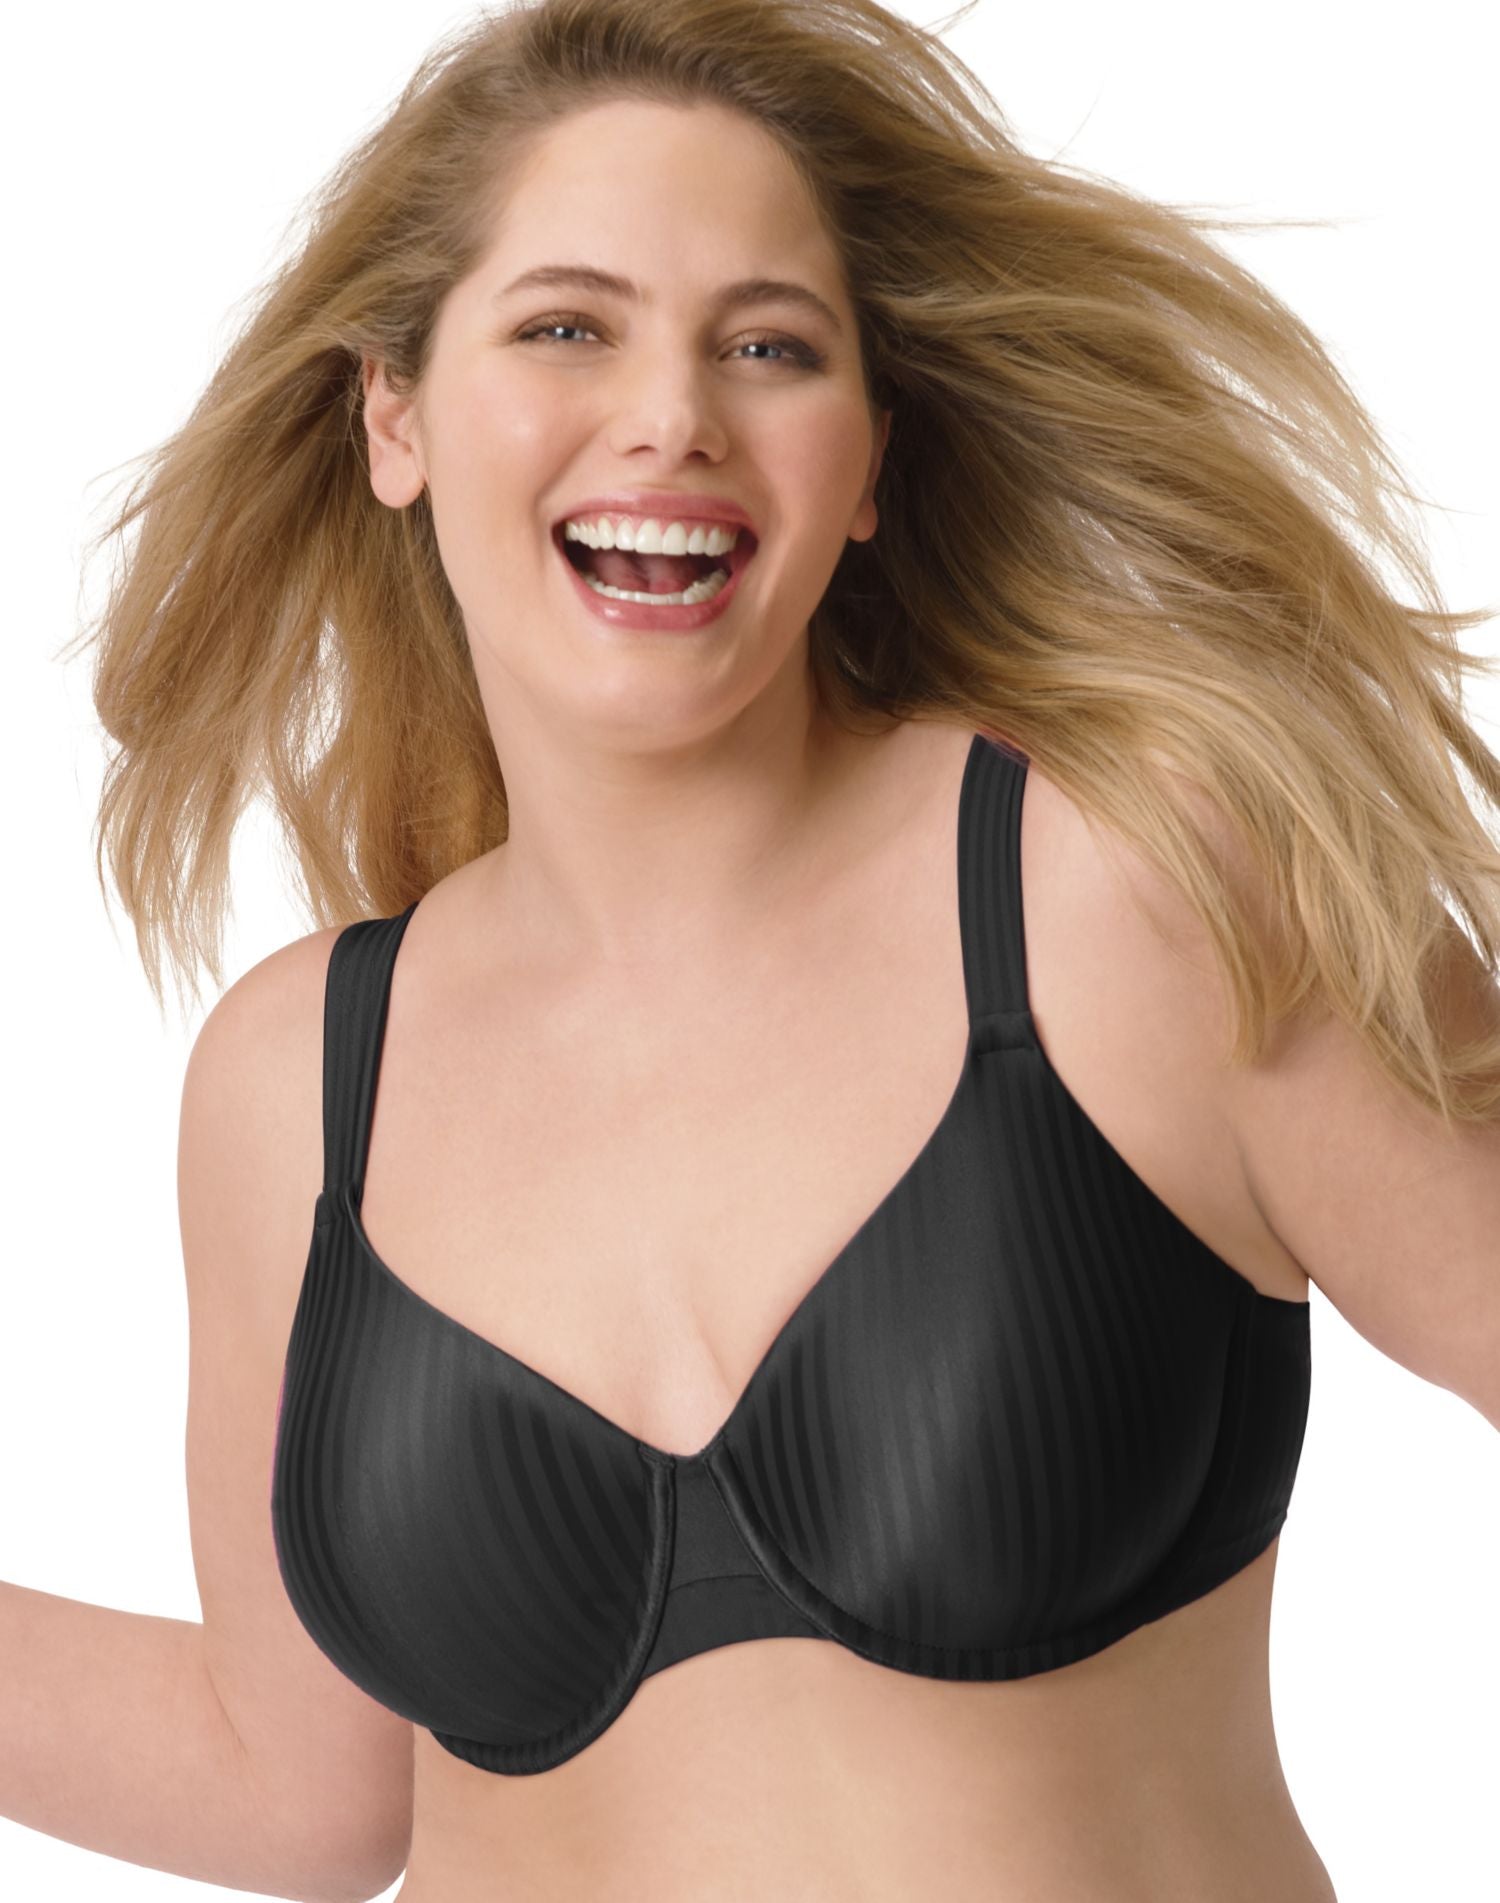 5 PLAYTEX 18 HOUR bras, Style 0027 / 27 ALL COLORS